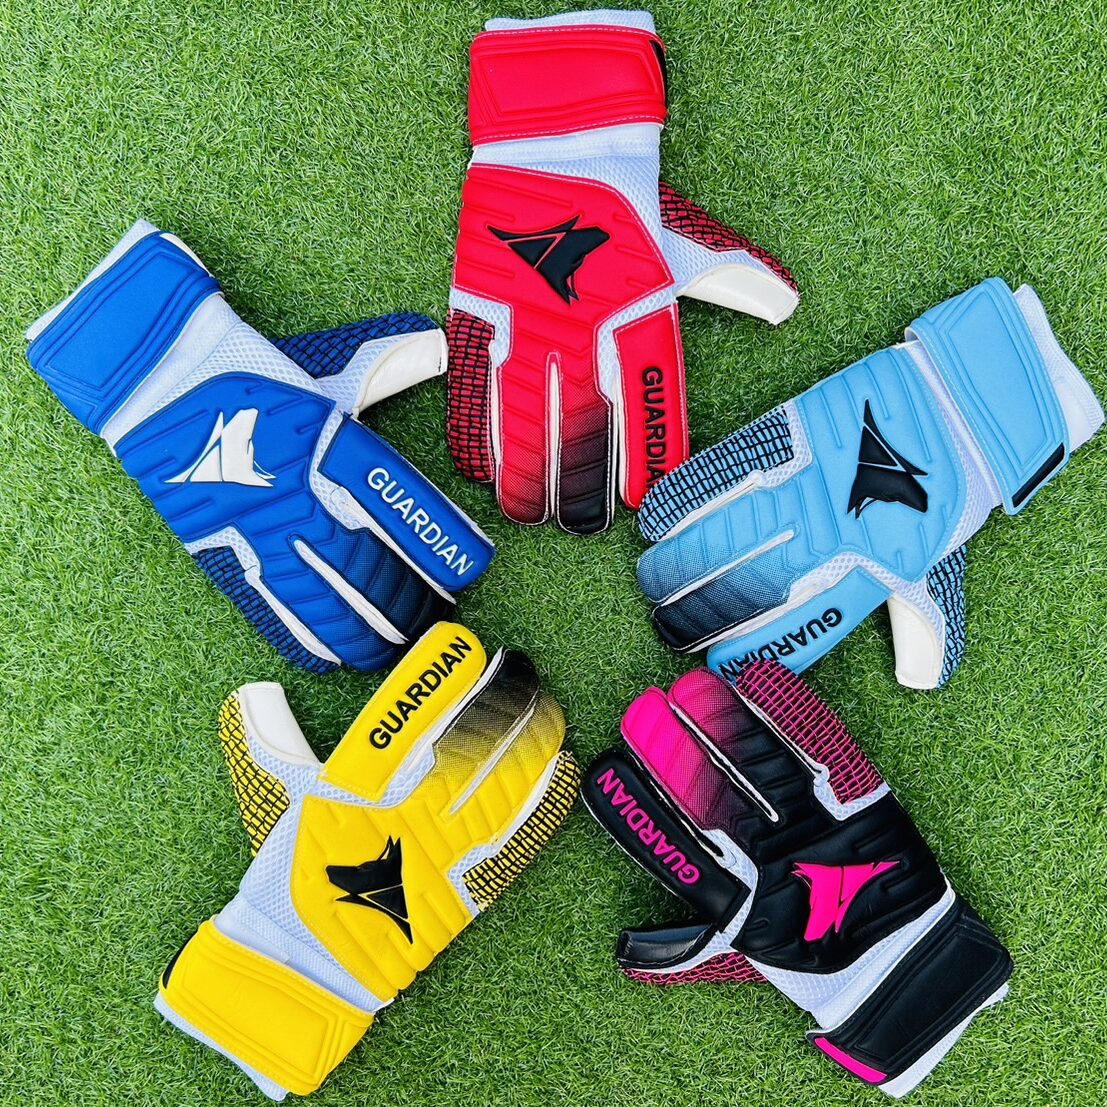 laelaps.jp – GK most trusted glove, LAELAPS.